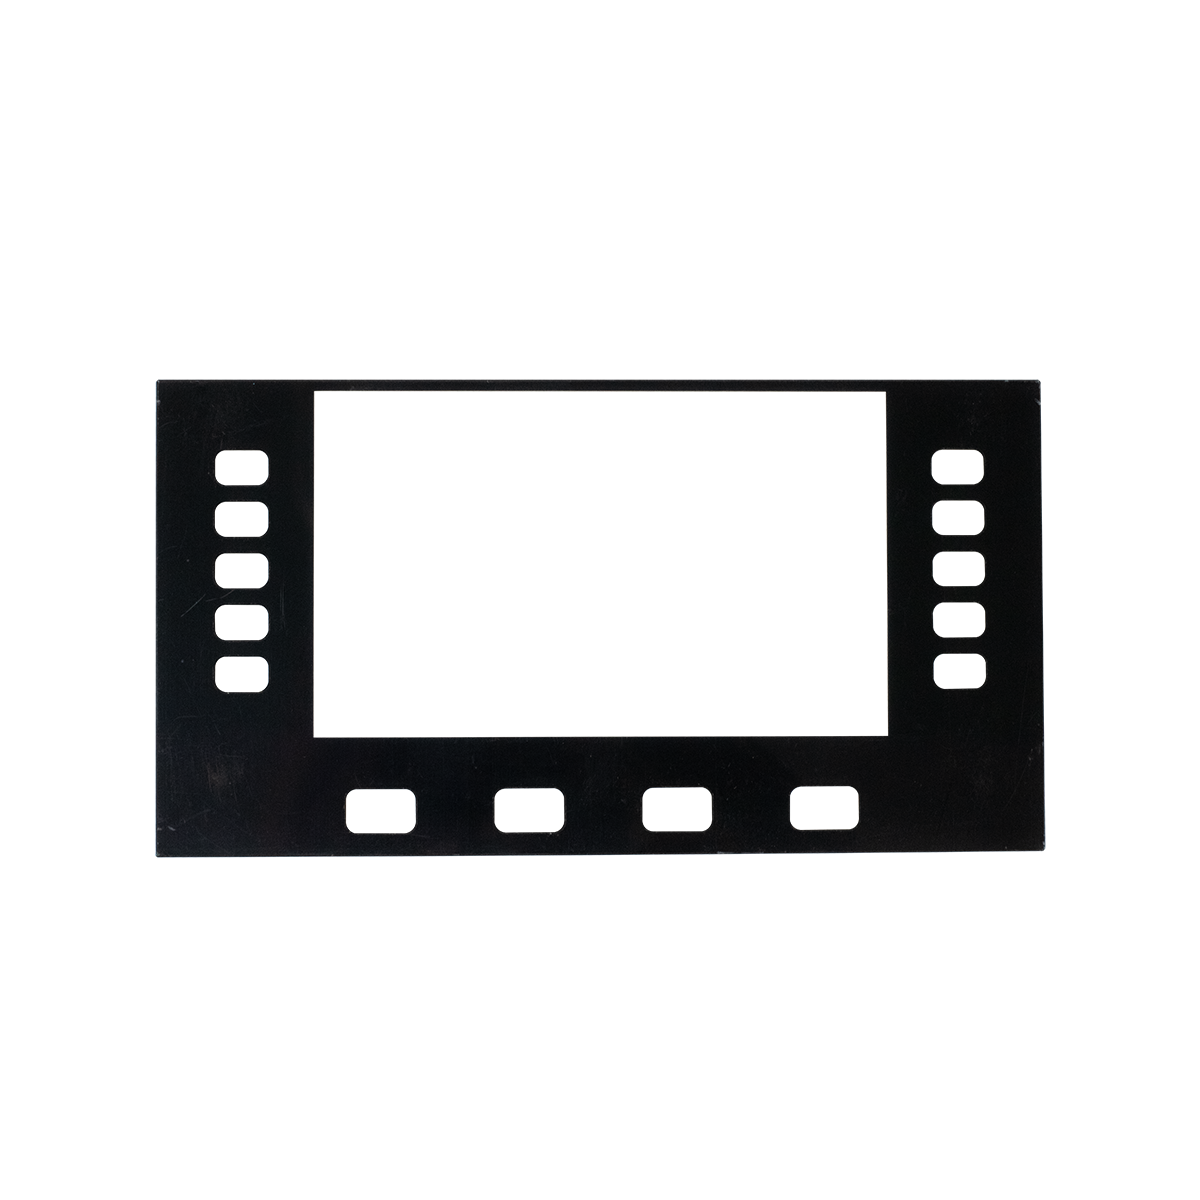 REPLACEMENT FACEPLATE FOR CISCO 8841, 8851 AND 886